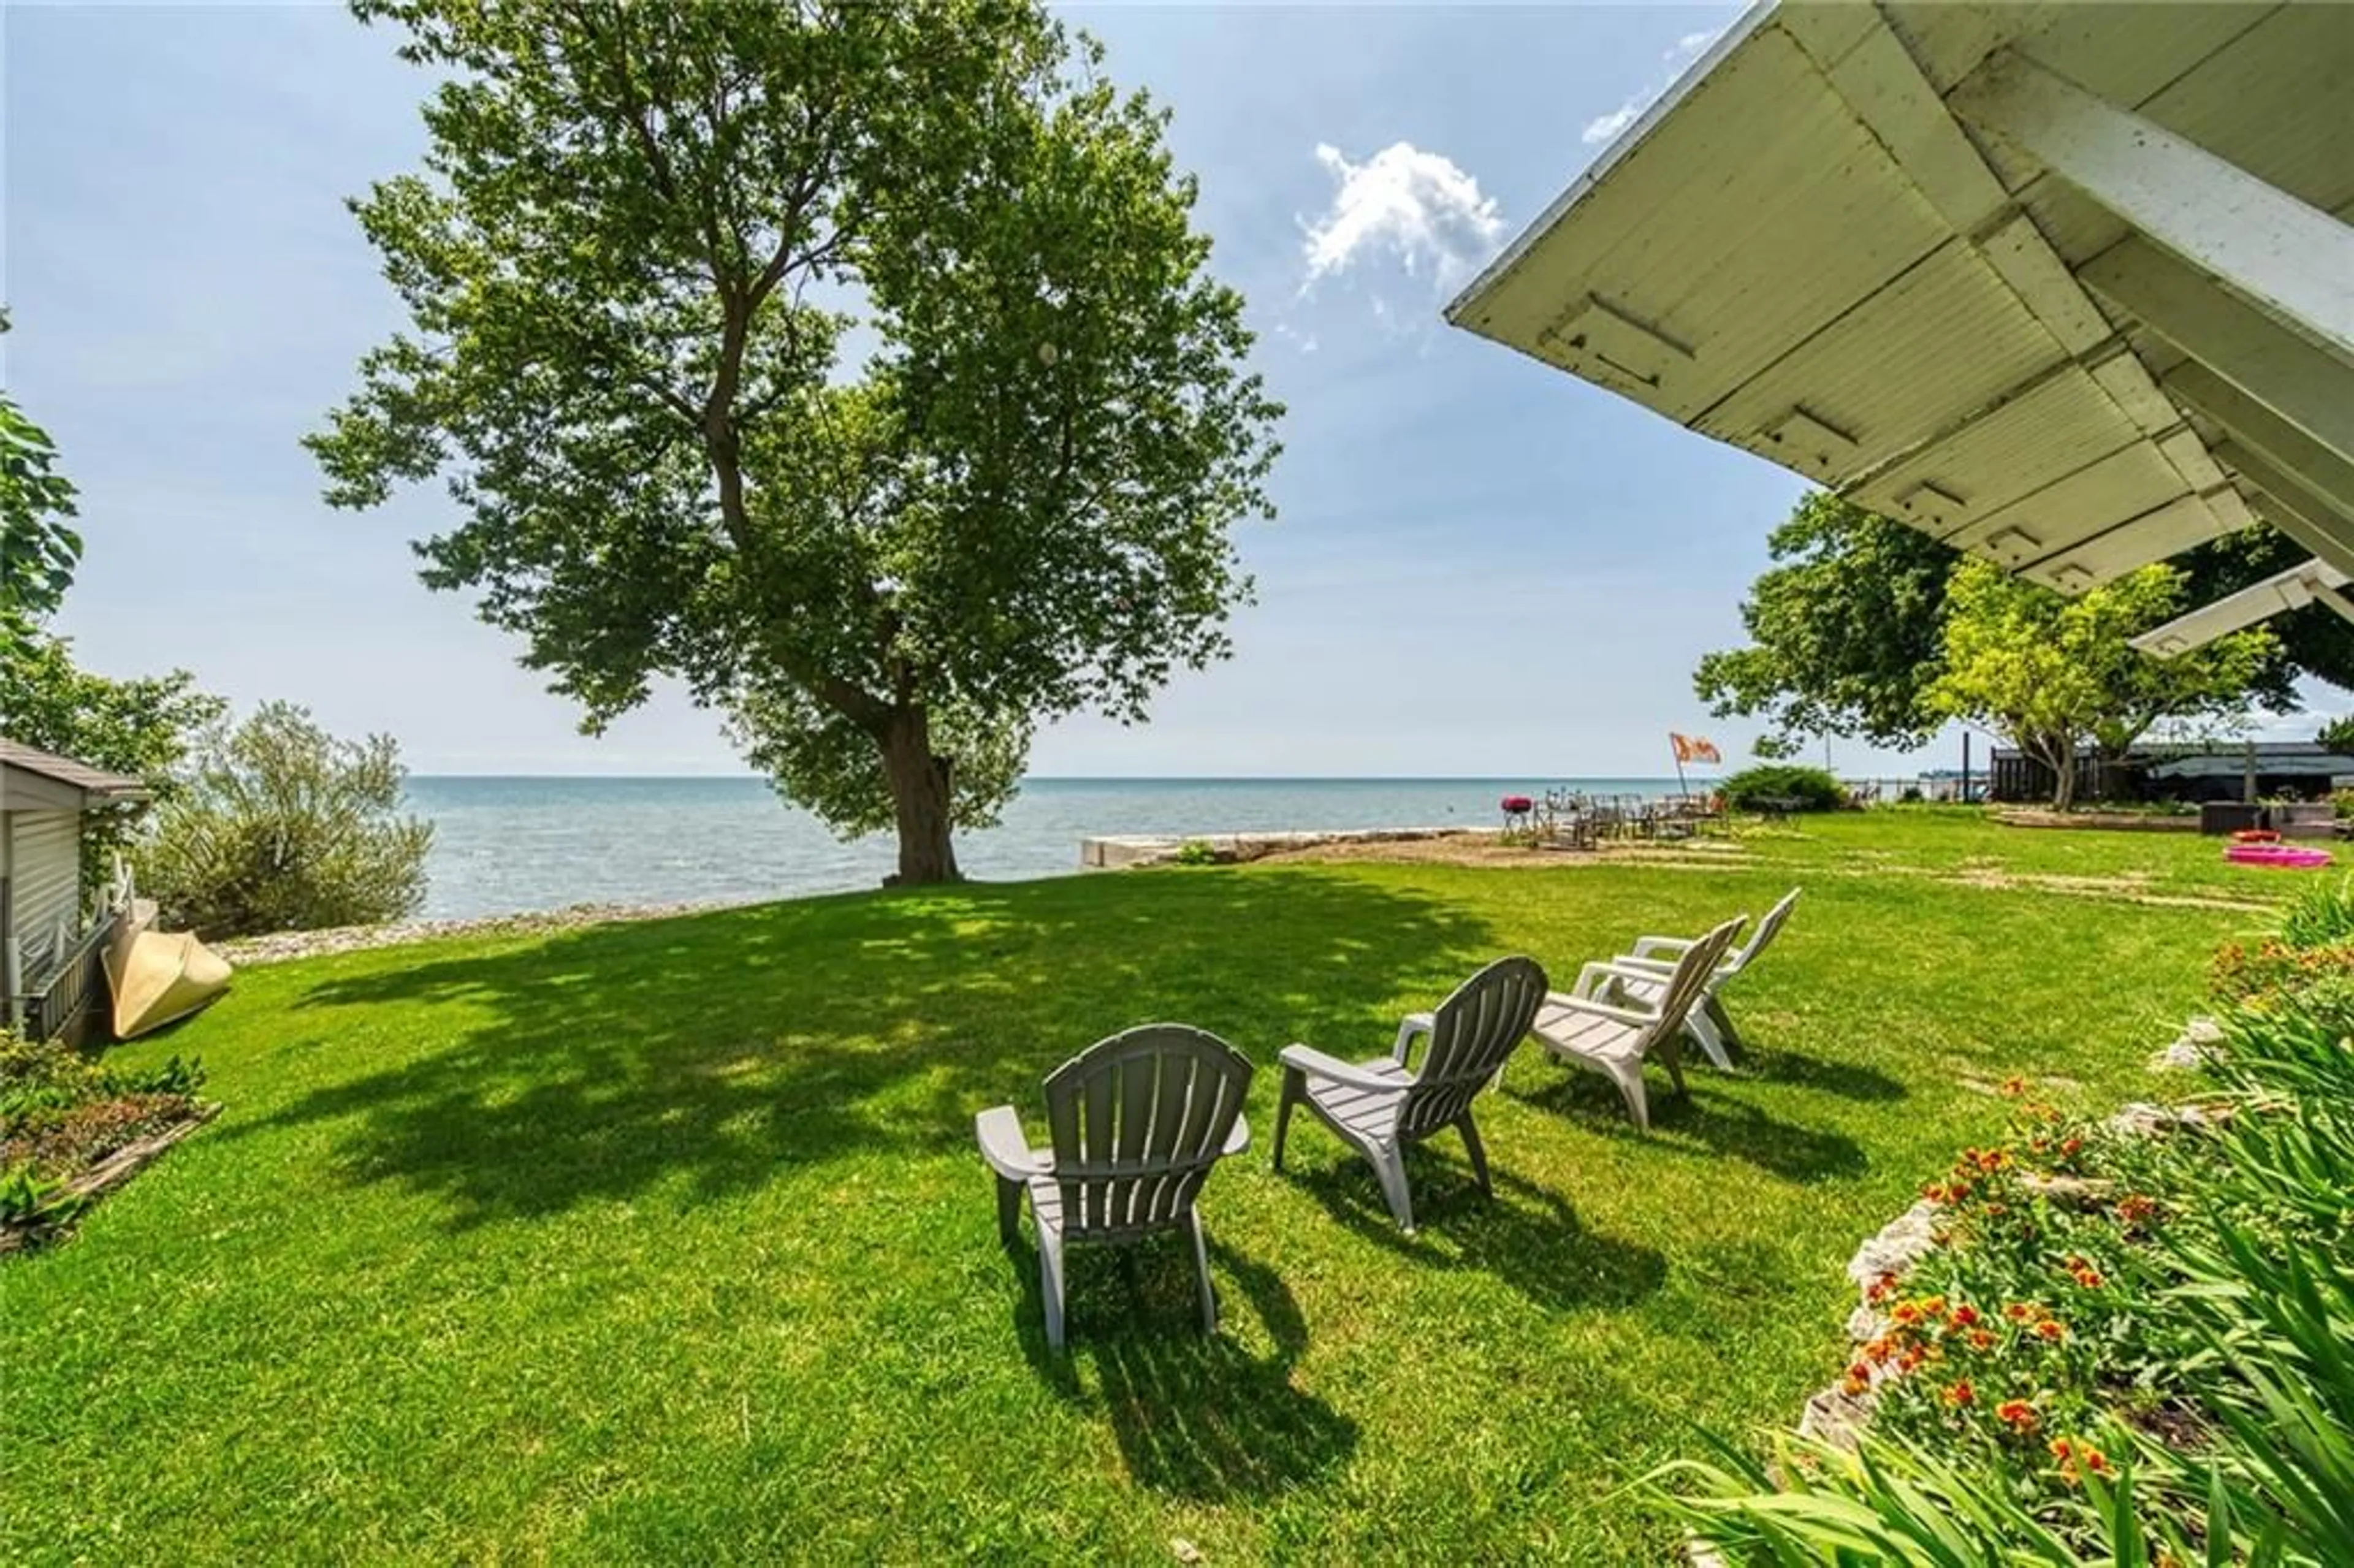 Lakeview for 60 VOLA BEACH Lane, Selkirk Ontario N0A 1P0